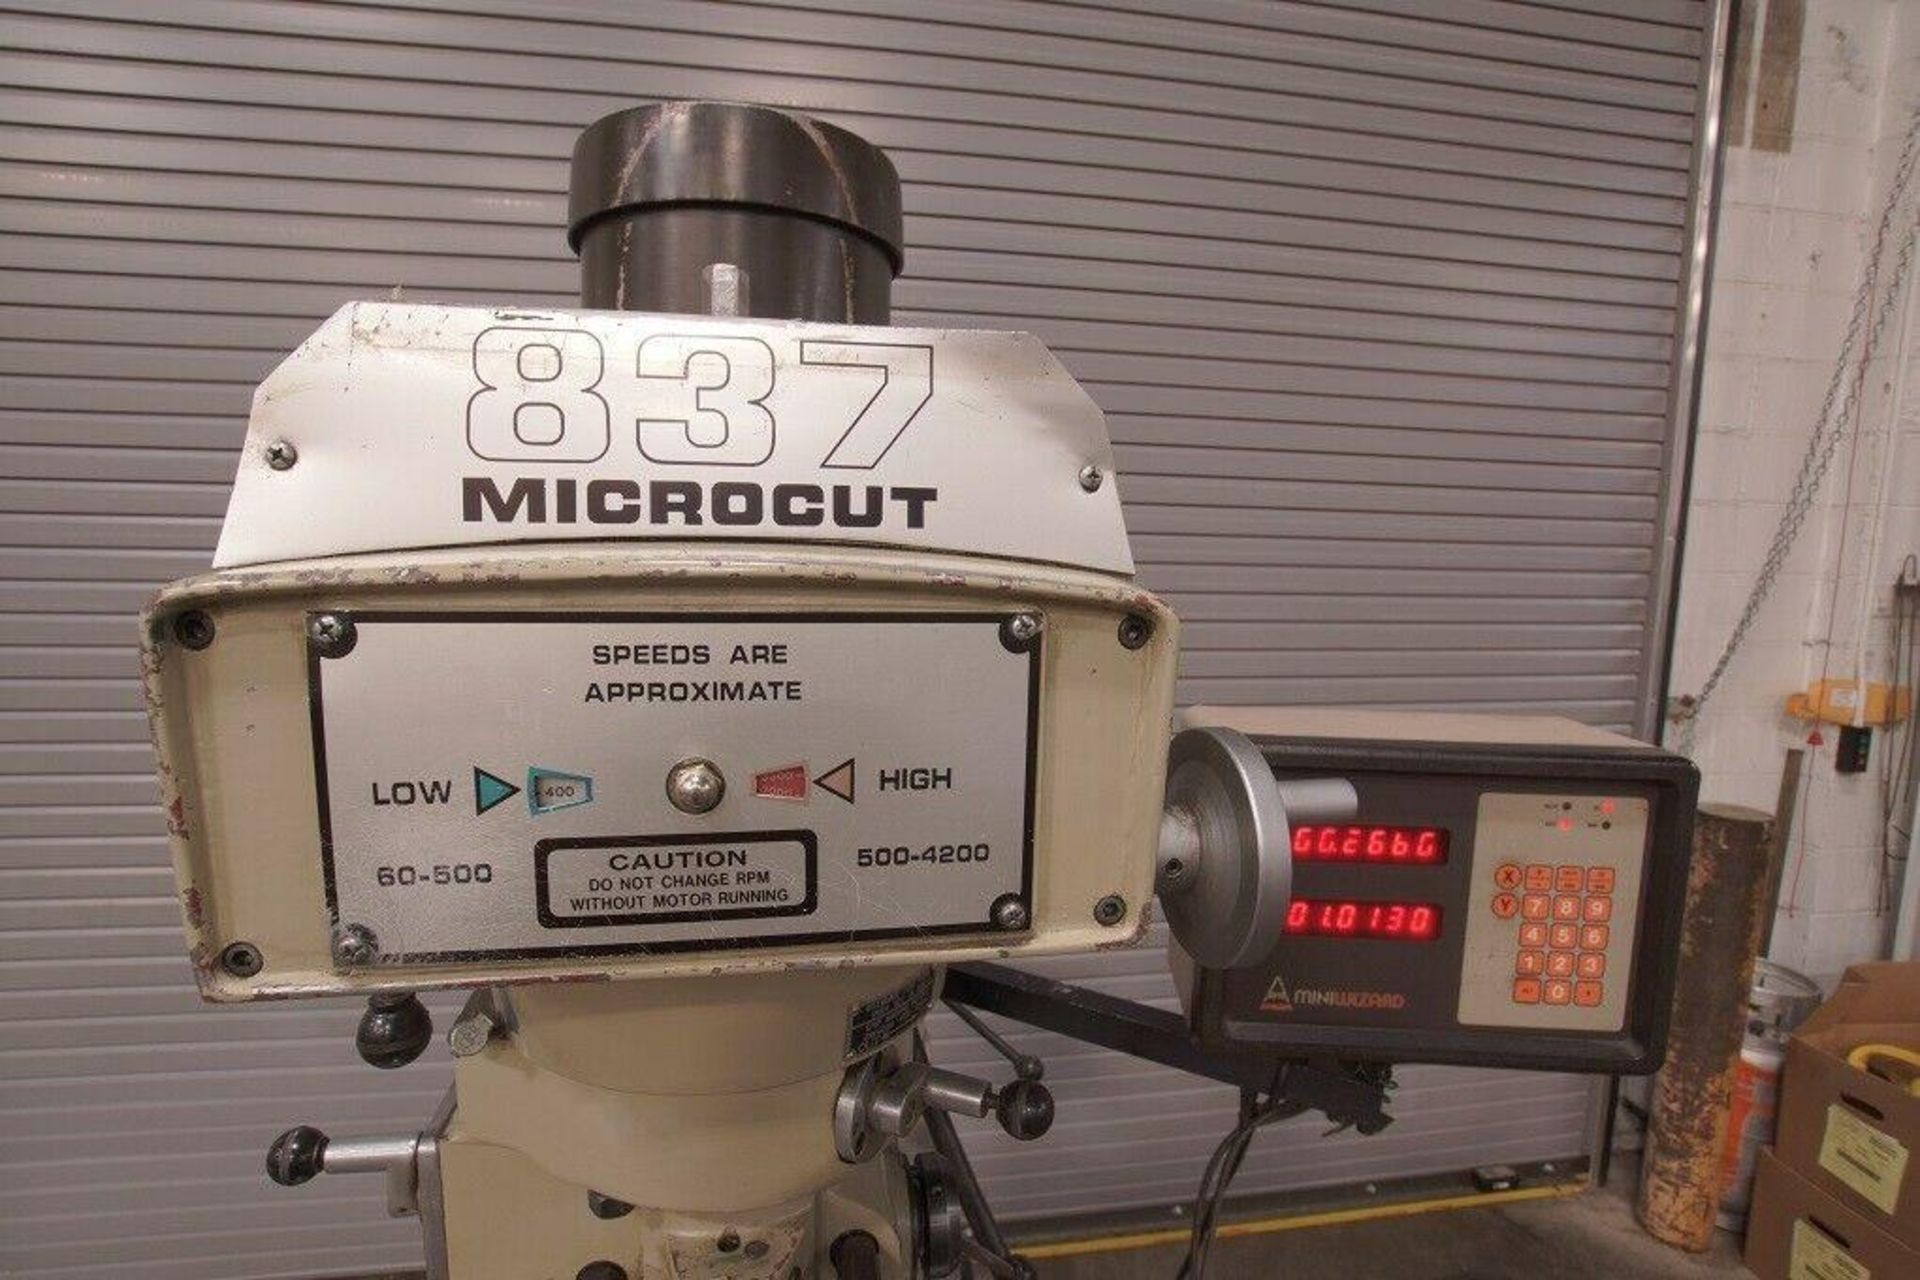 Wells Index Microcut Vertical Milling Machine with: Anilam wizard two axis digital readout servo pow - Image 11 of 12